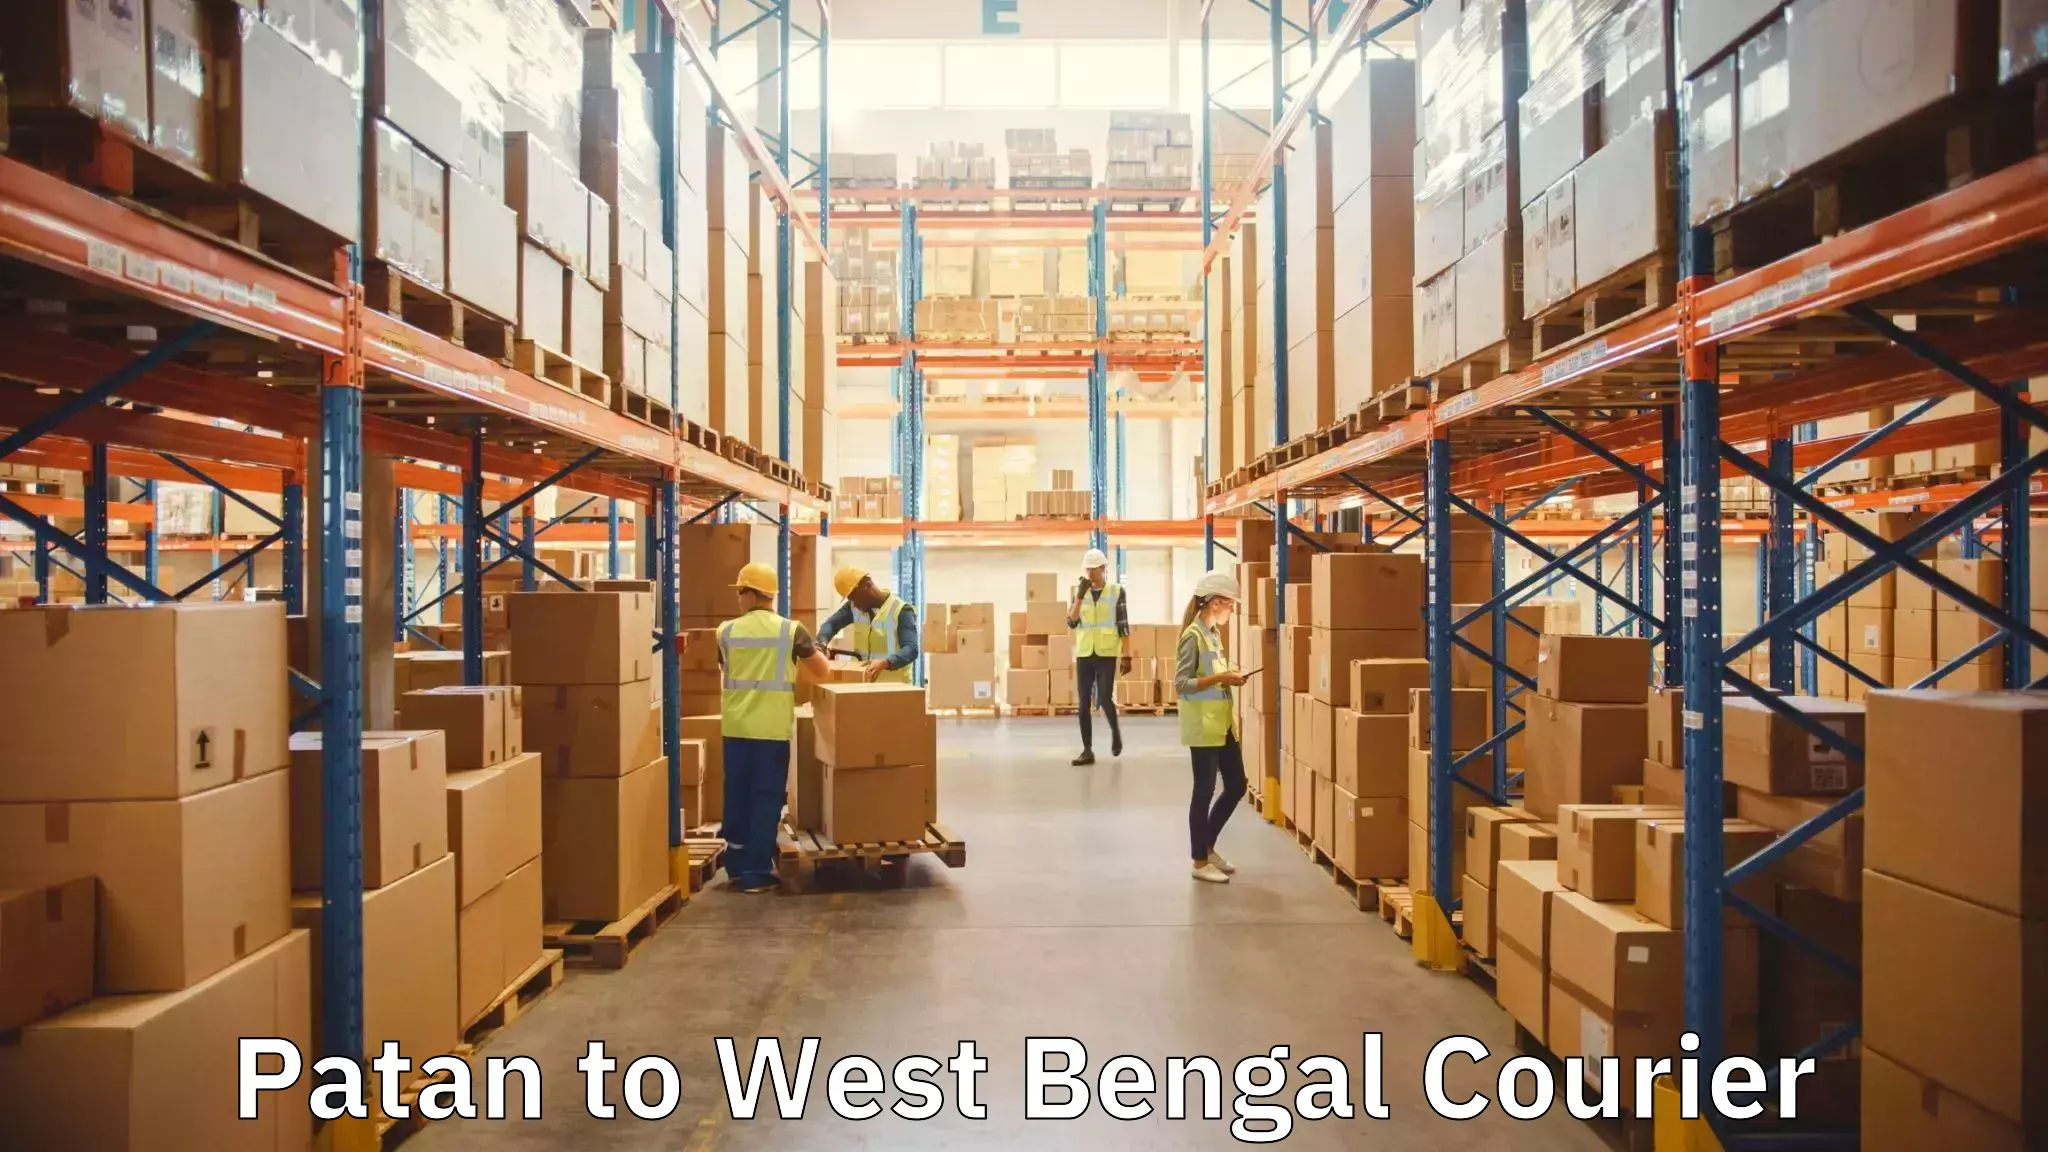 Specialized moving company Patan to West Bengal